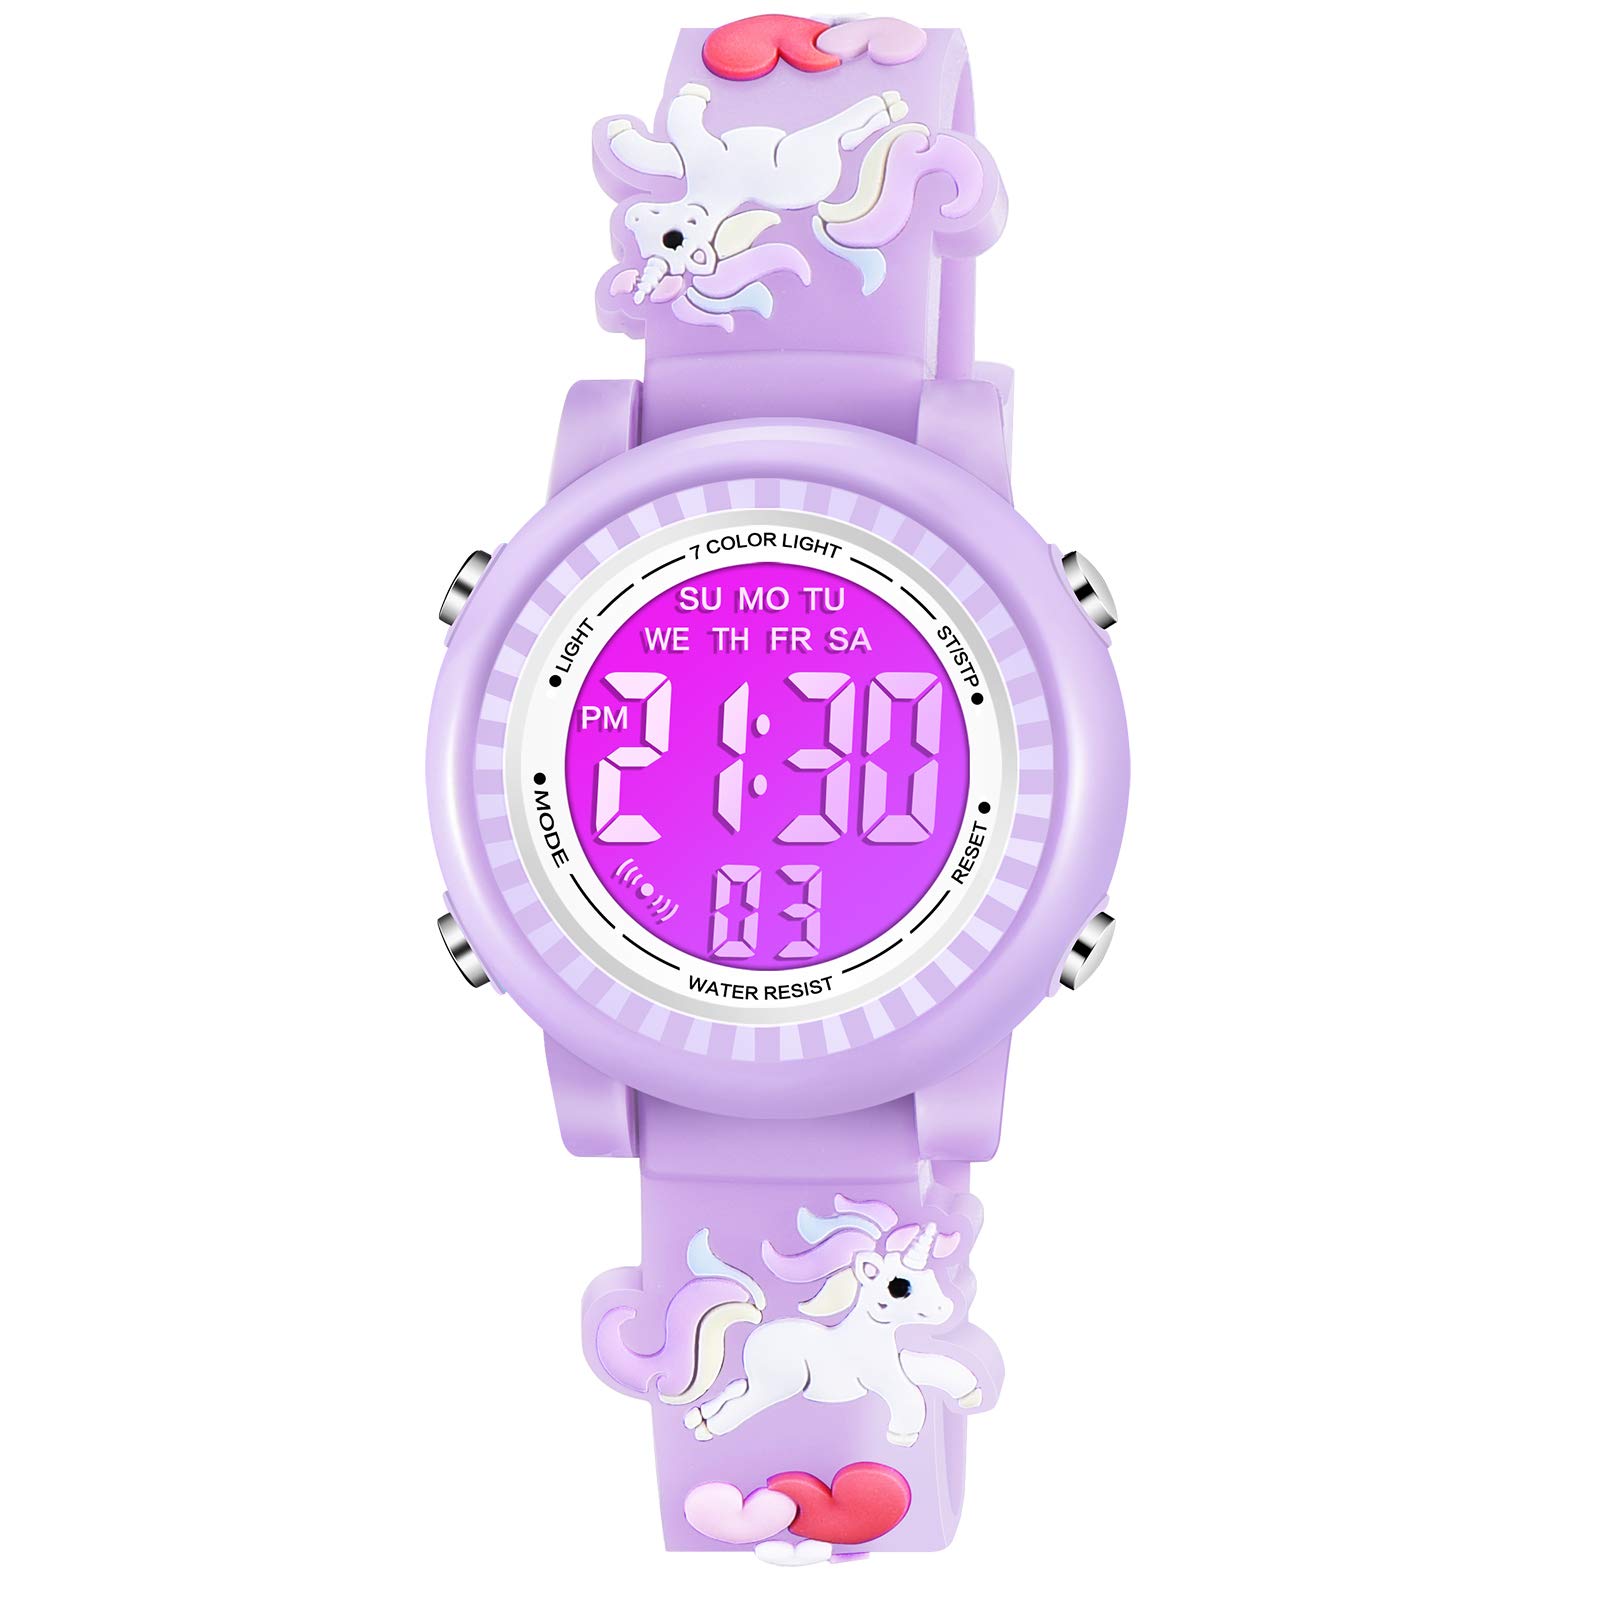 Venhoo Kids Watches 3D Cartoon Waterproof 7 Color Lights Toddler Wrist Digital Watch with Alarm Stopwatch for 3-10 Year Boys Girls Little Child